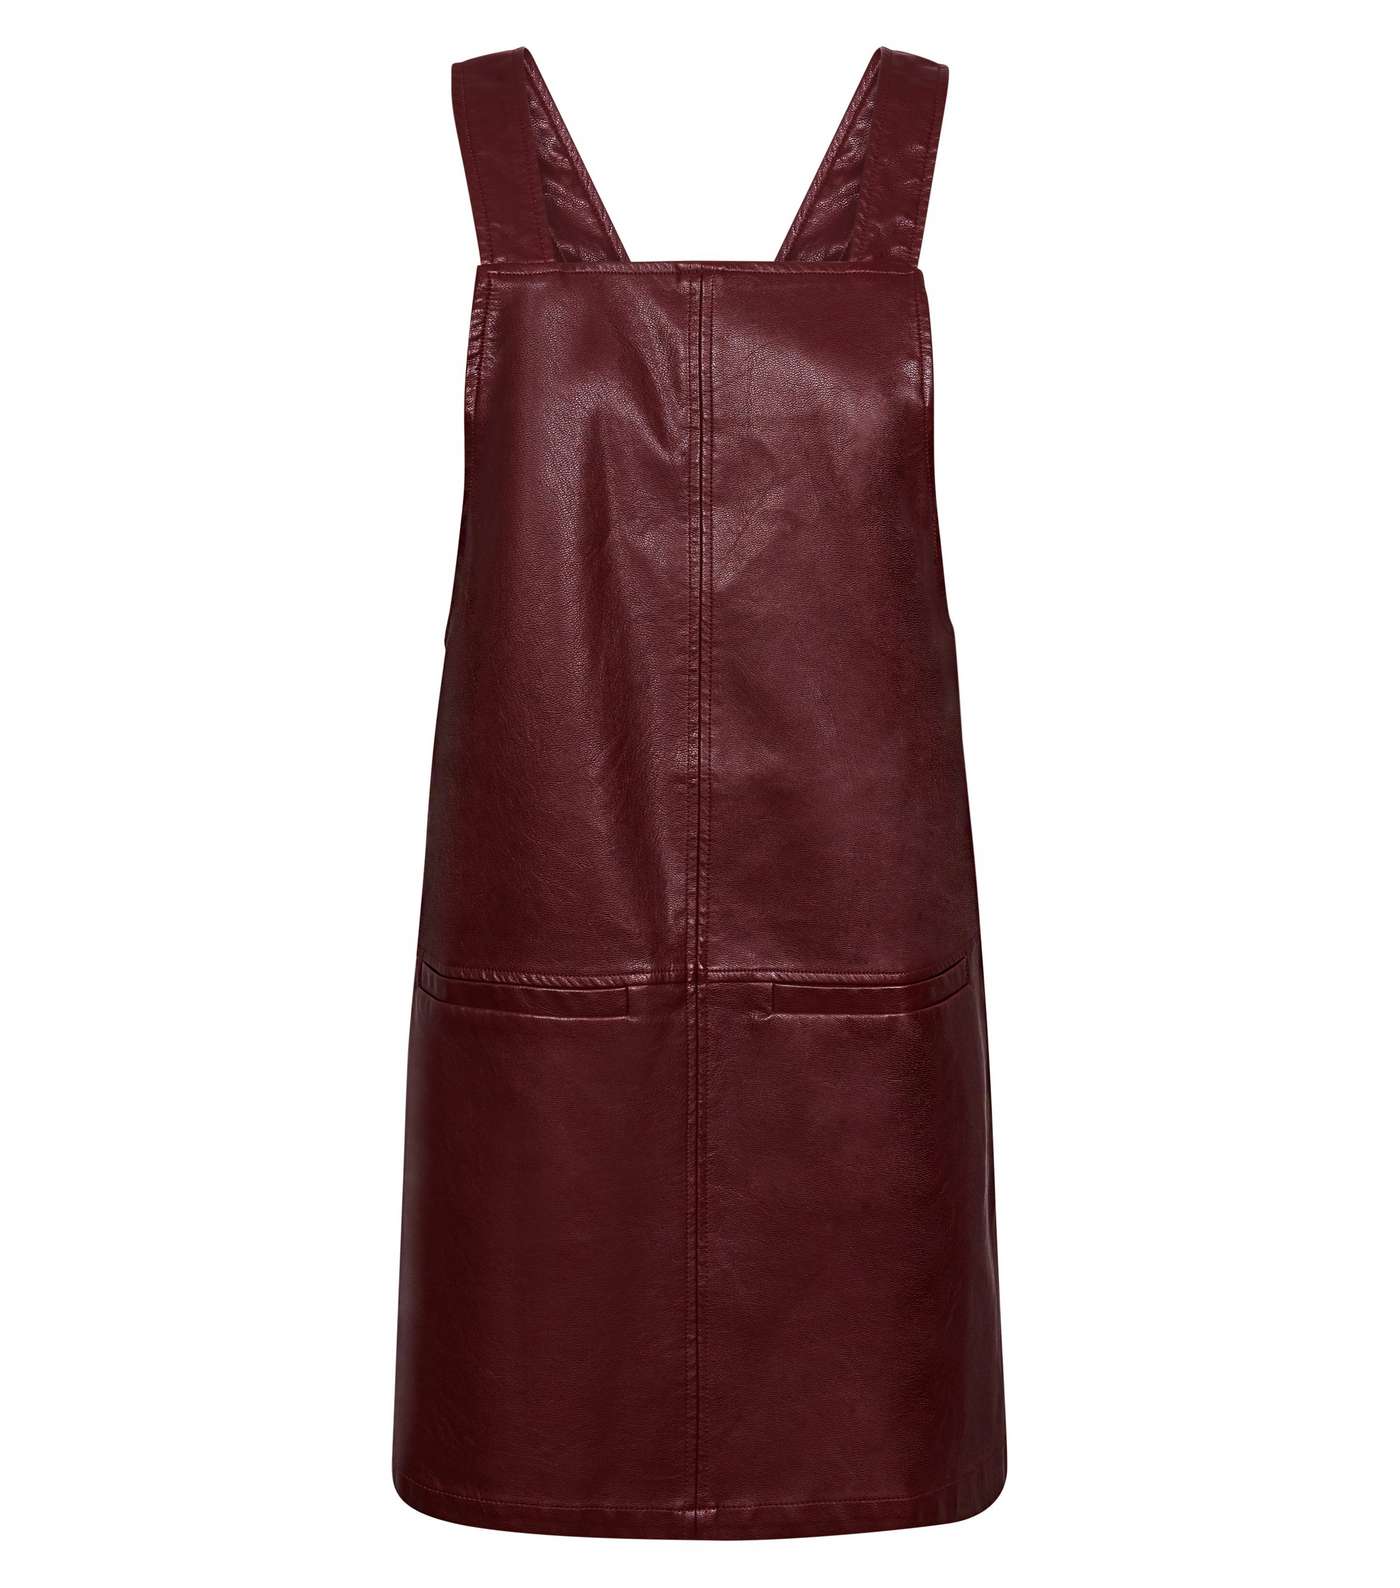 Burgundy Leather-Look Pinafore Dress Image 4